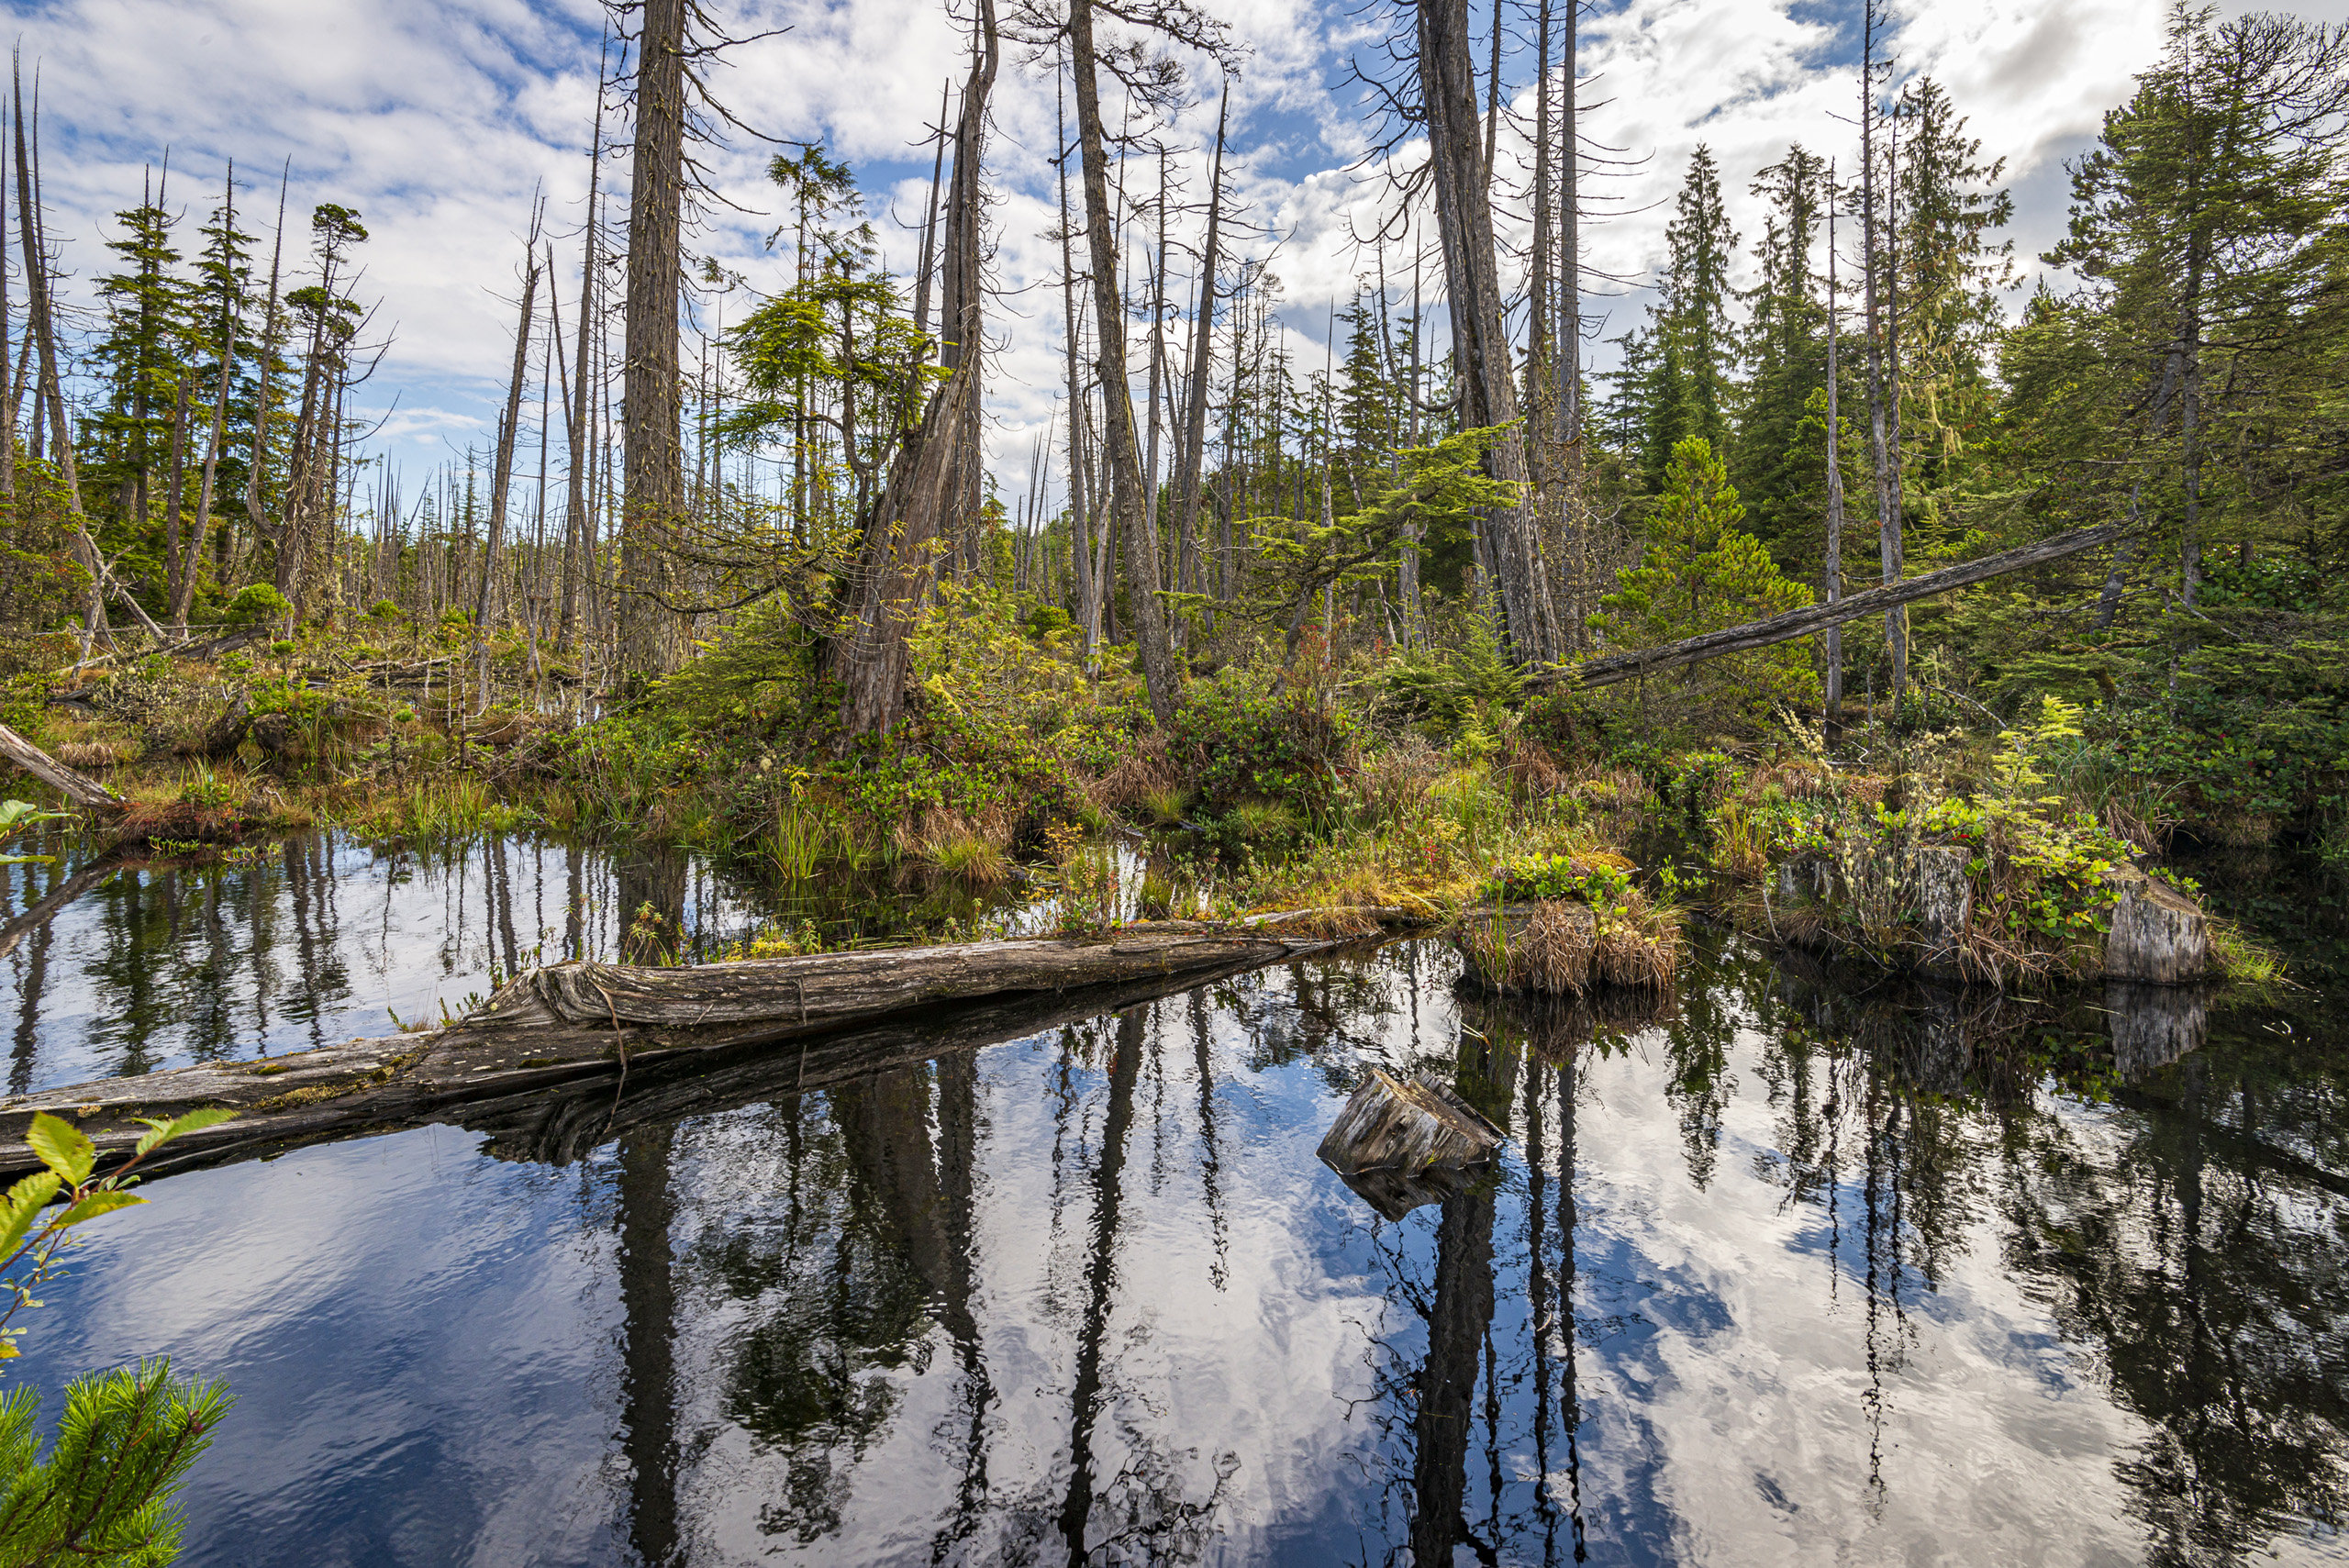 Northern Vancouver Island swamp and Cedars.